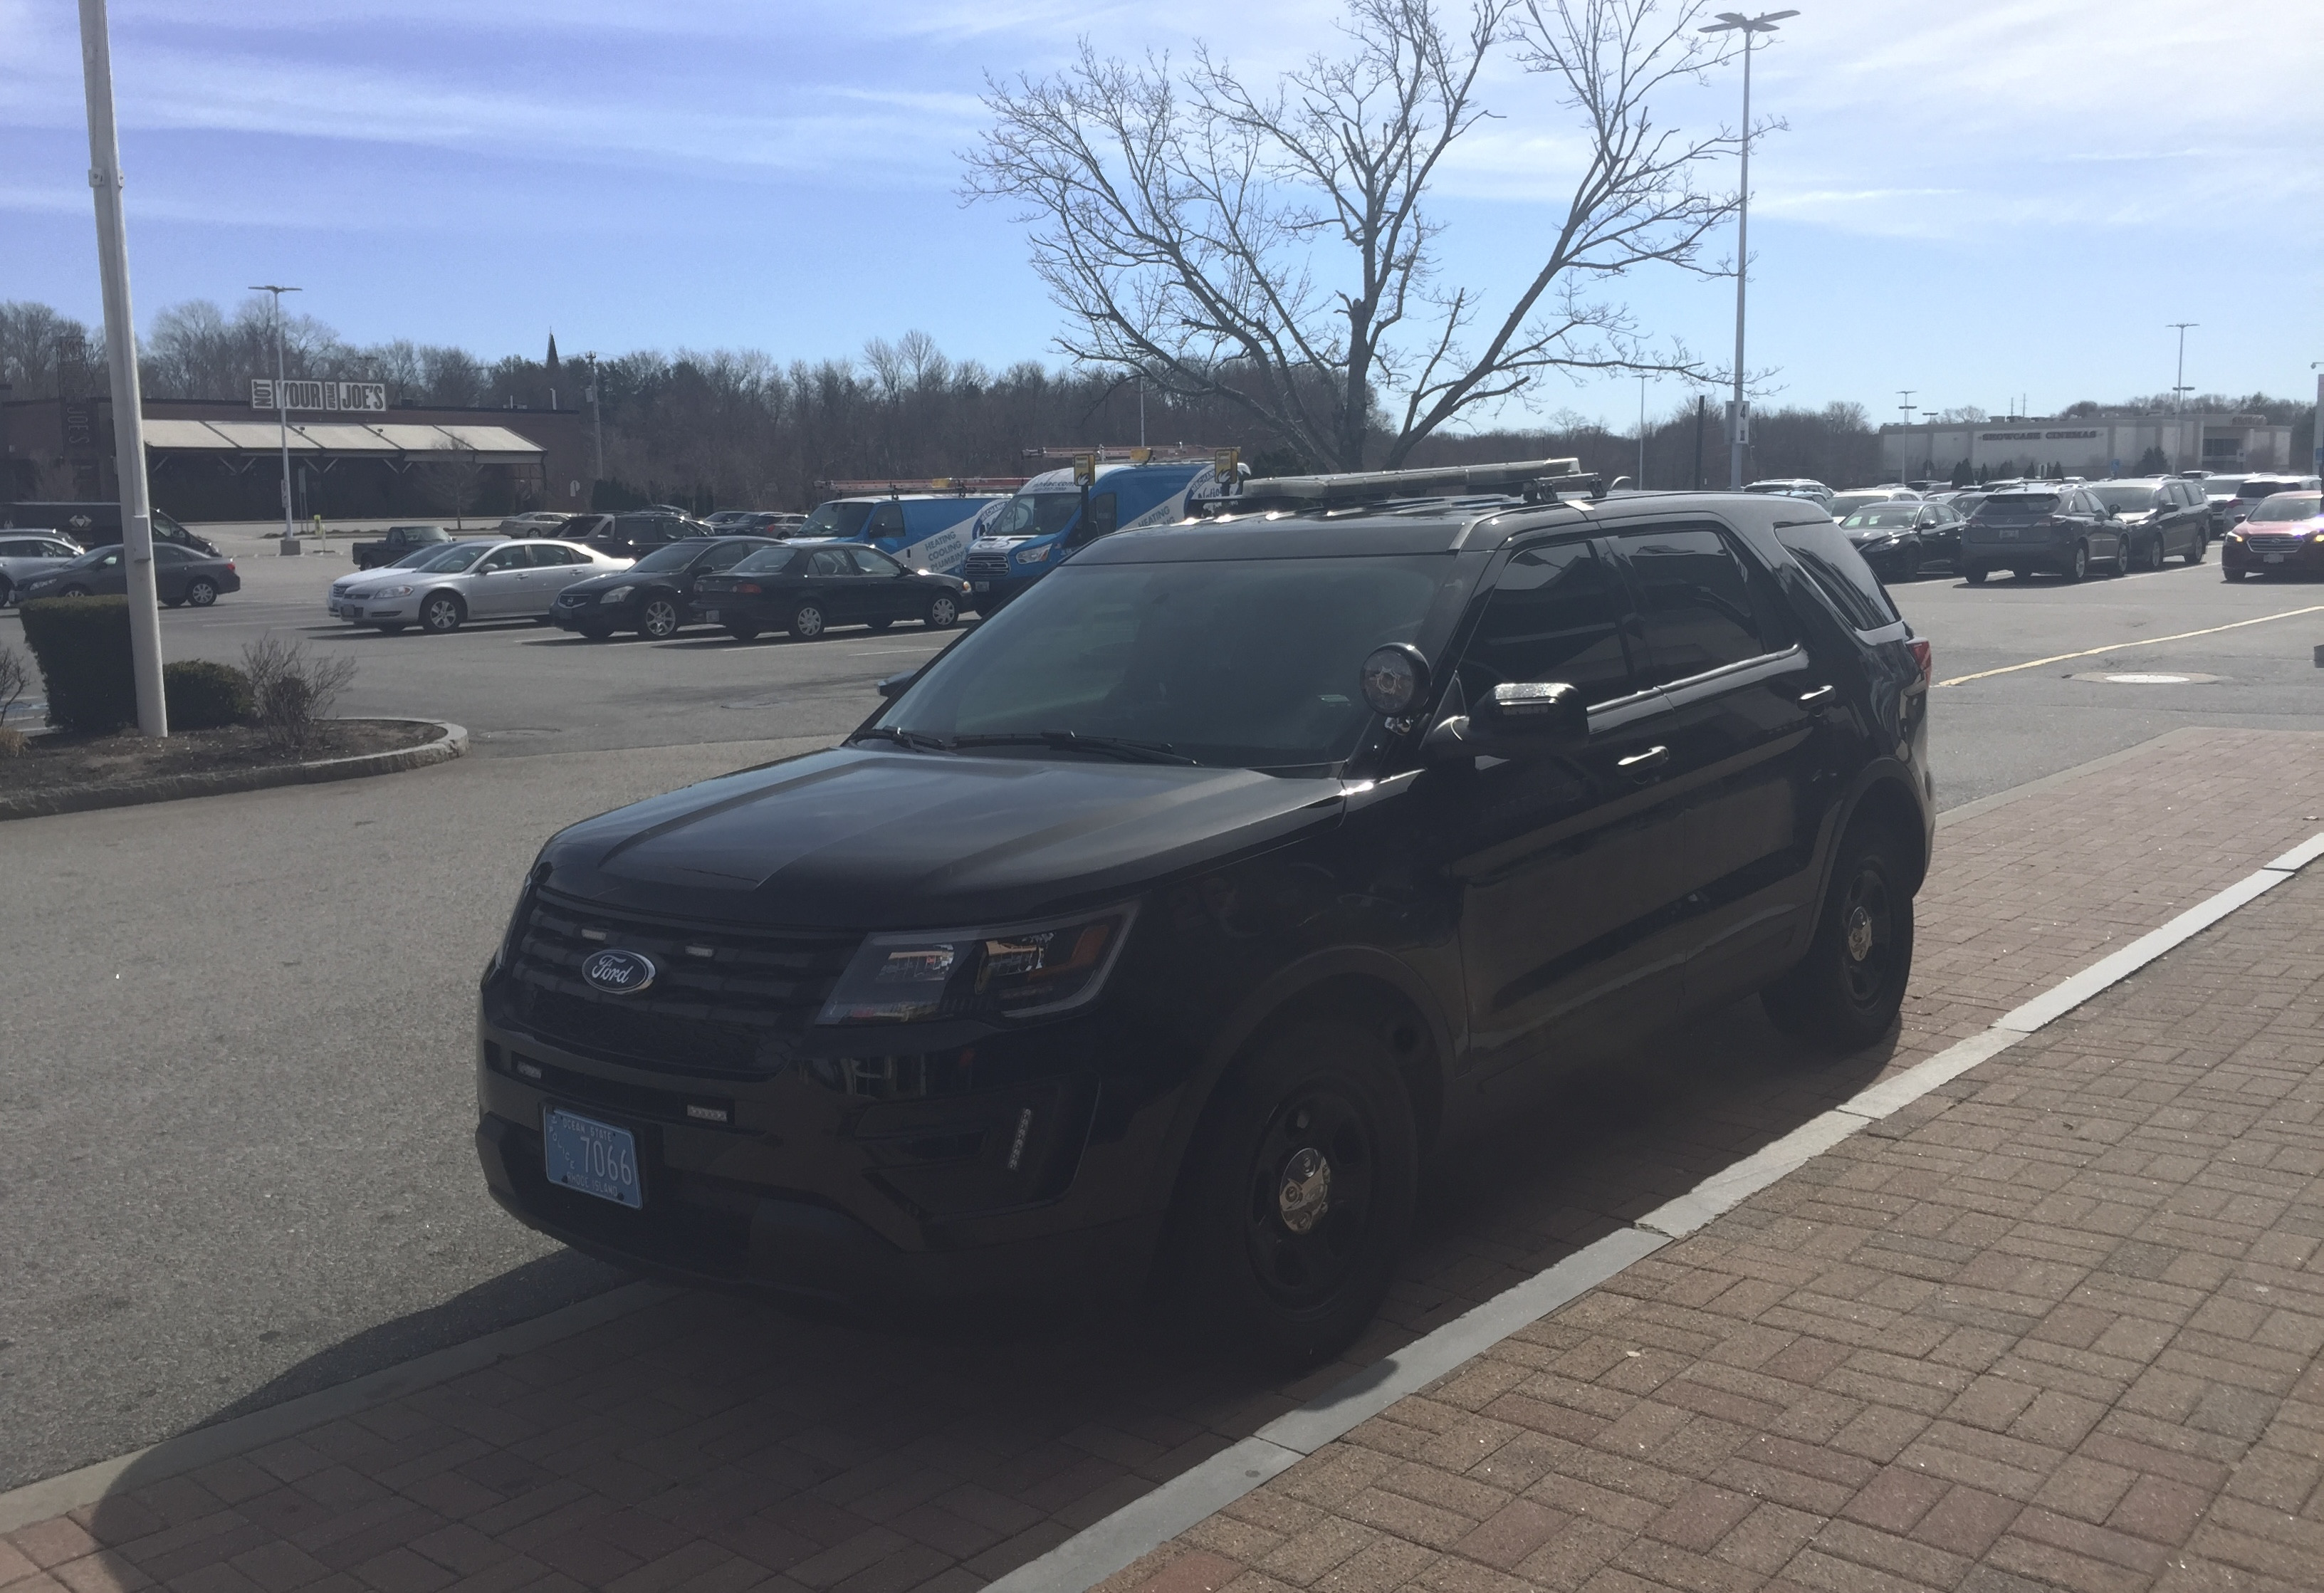 A photo  of Warwick Police
            Cruiser P-26, a 2019 Ford Police Interceptor Utility             taken by @riemergencyvehicles